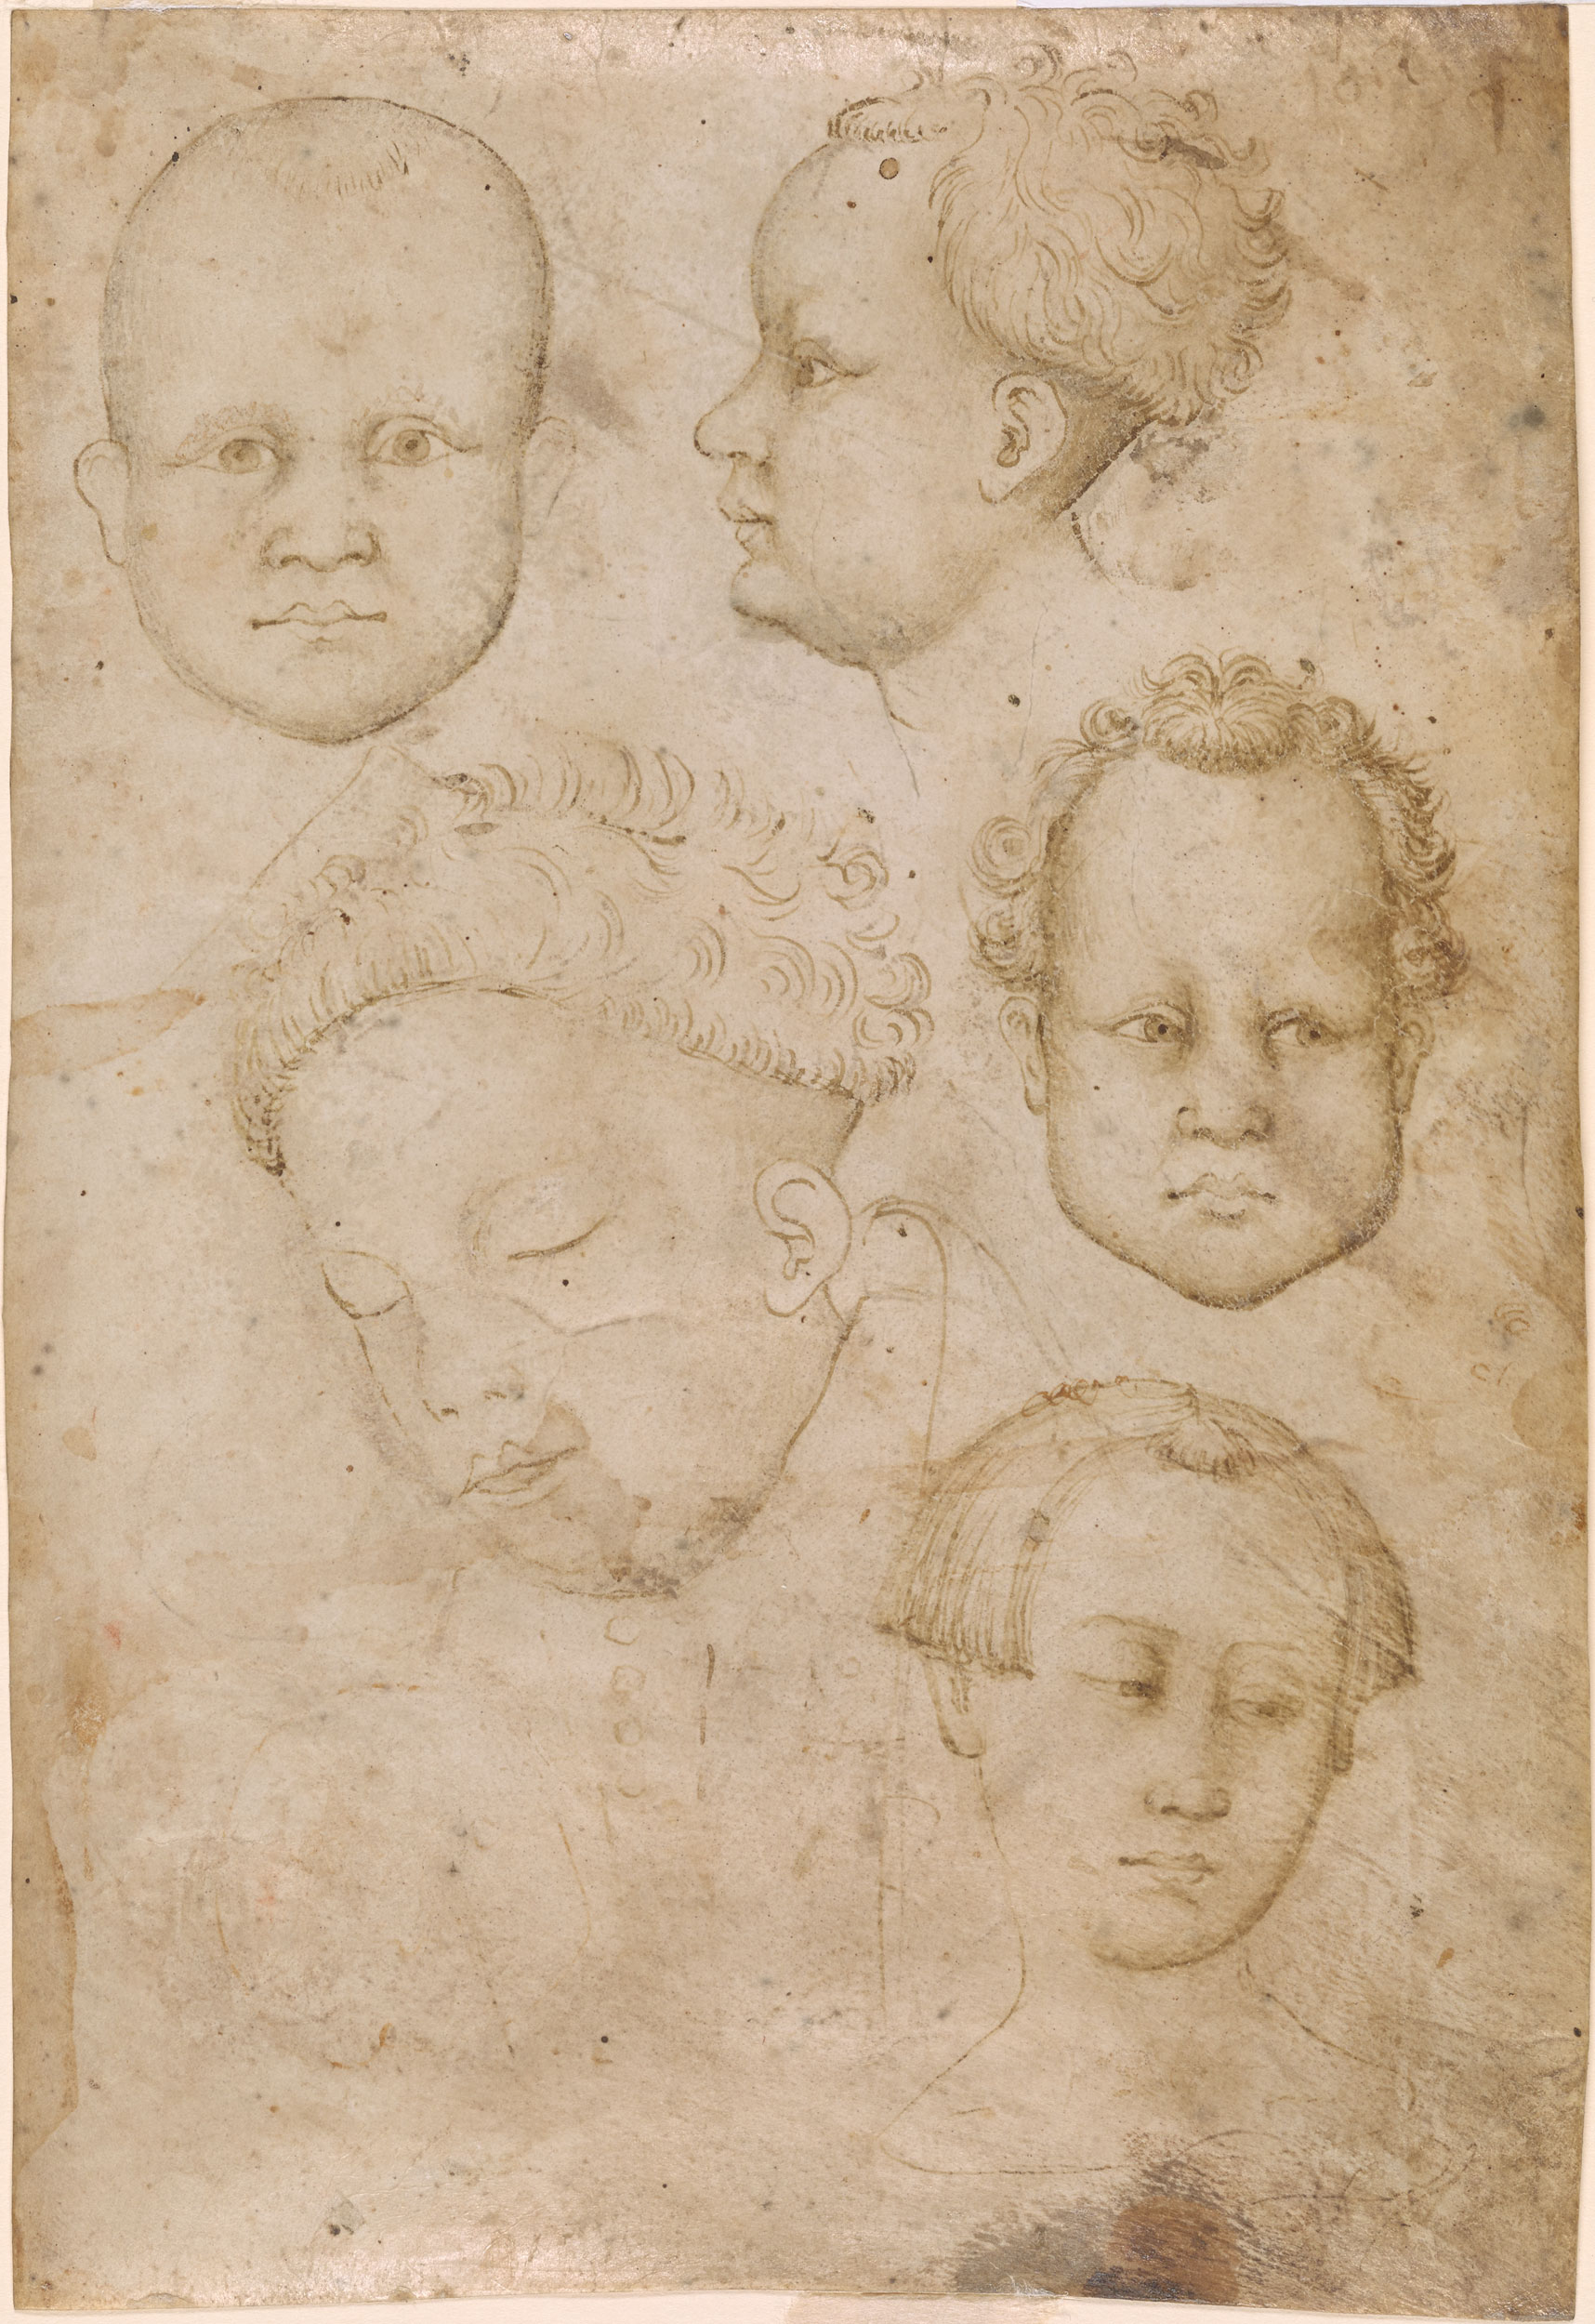 Studio of Pisanello | Heads of Young Boys | Drawings Online | The ...